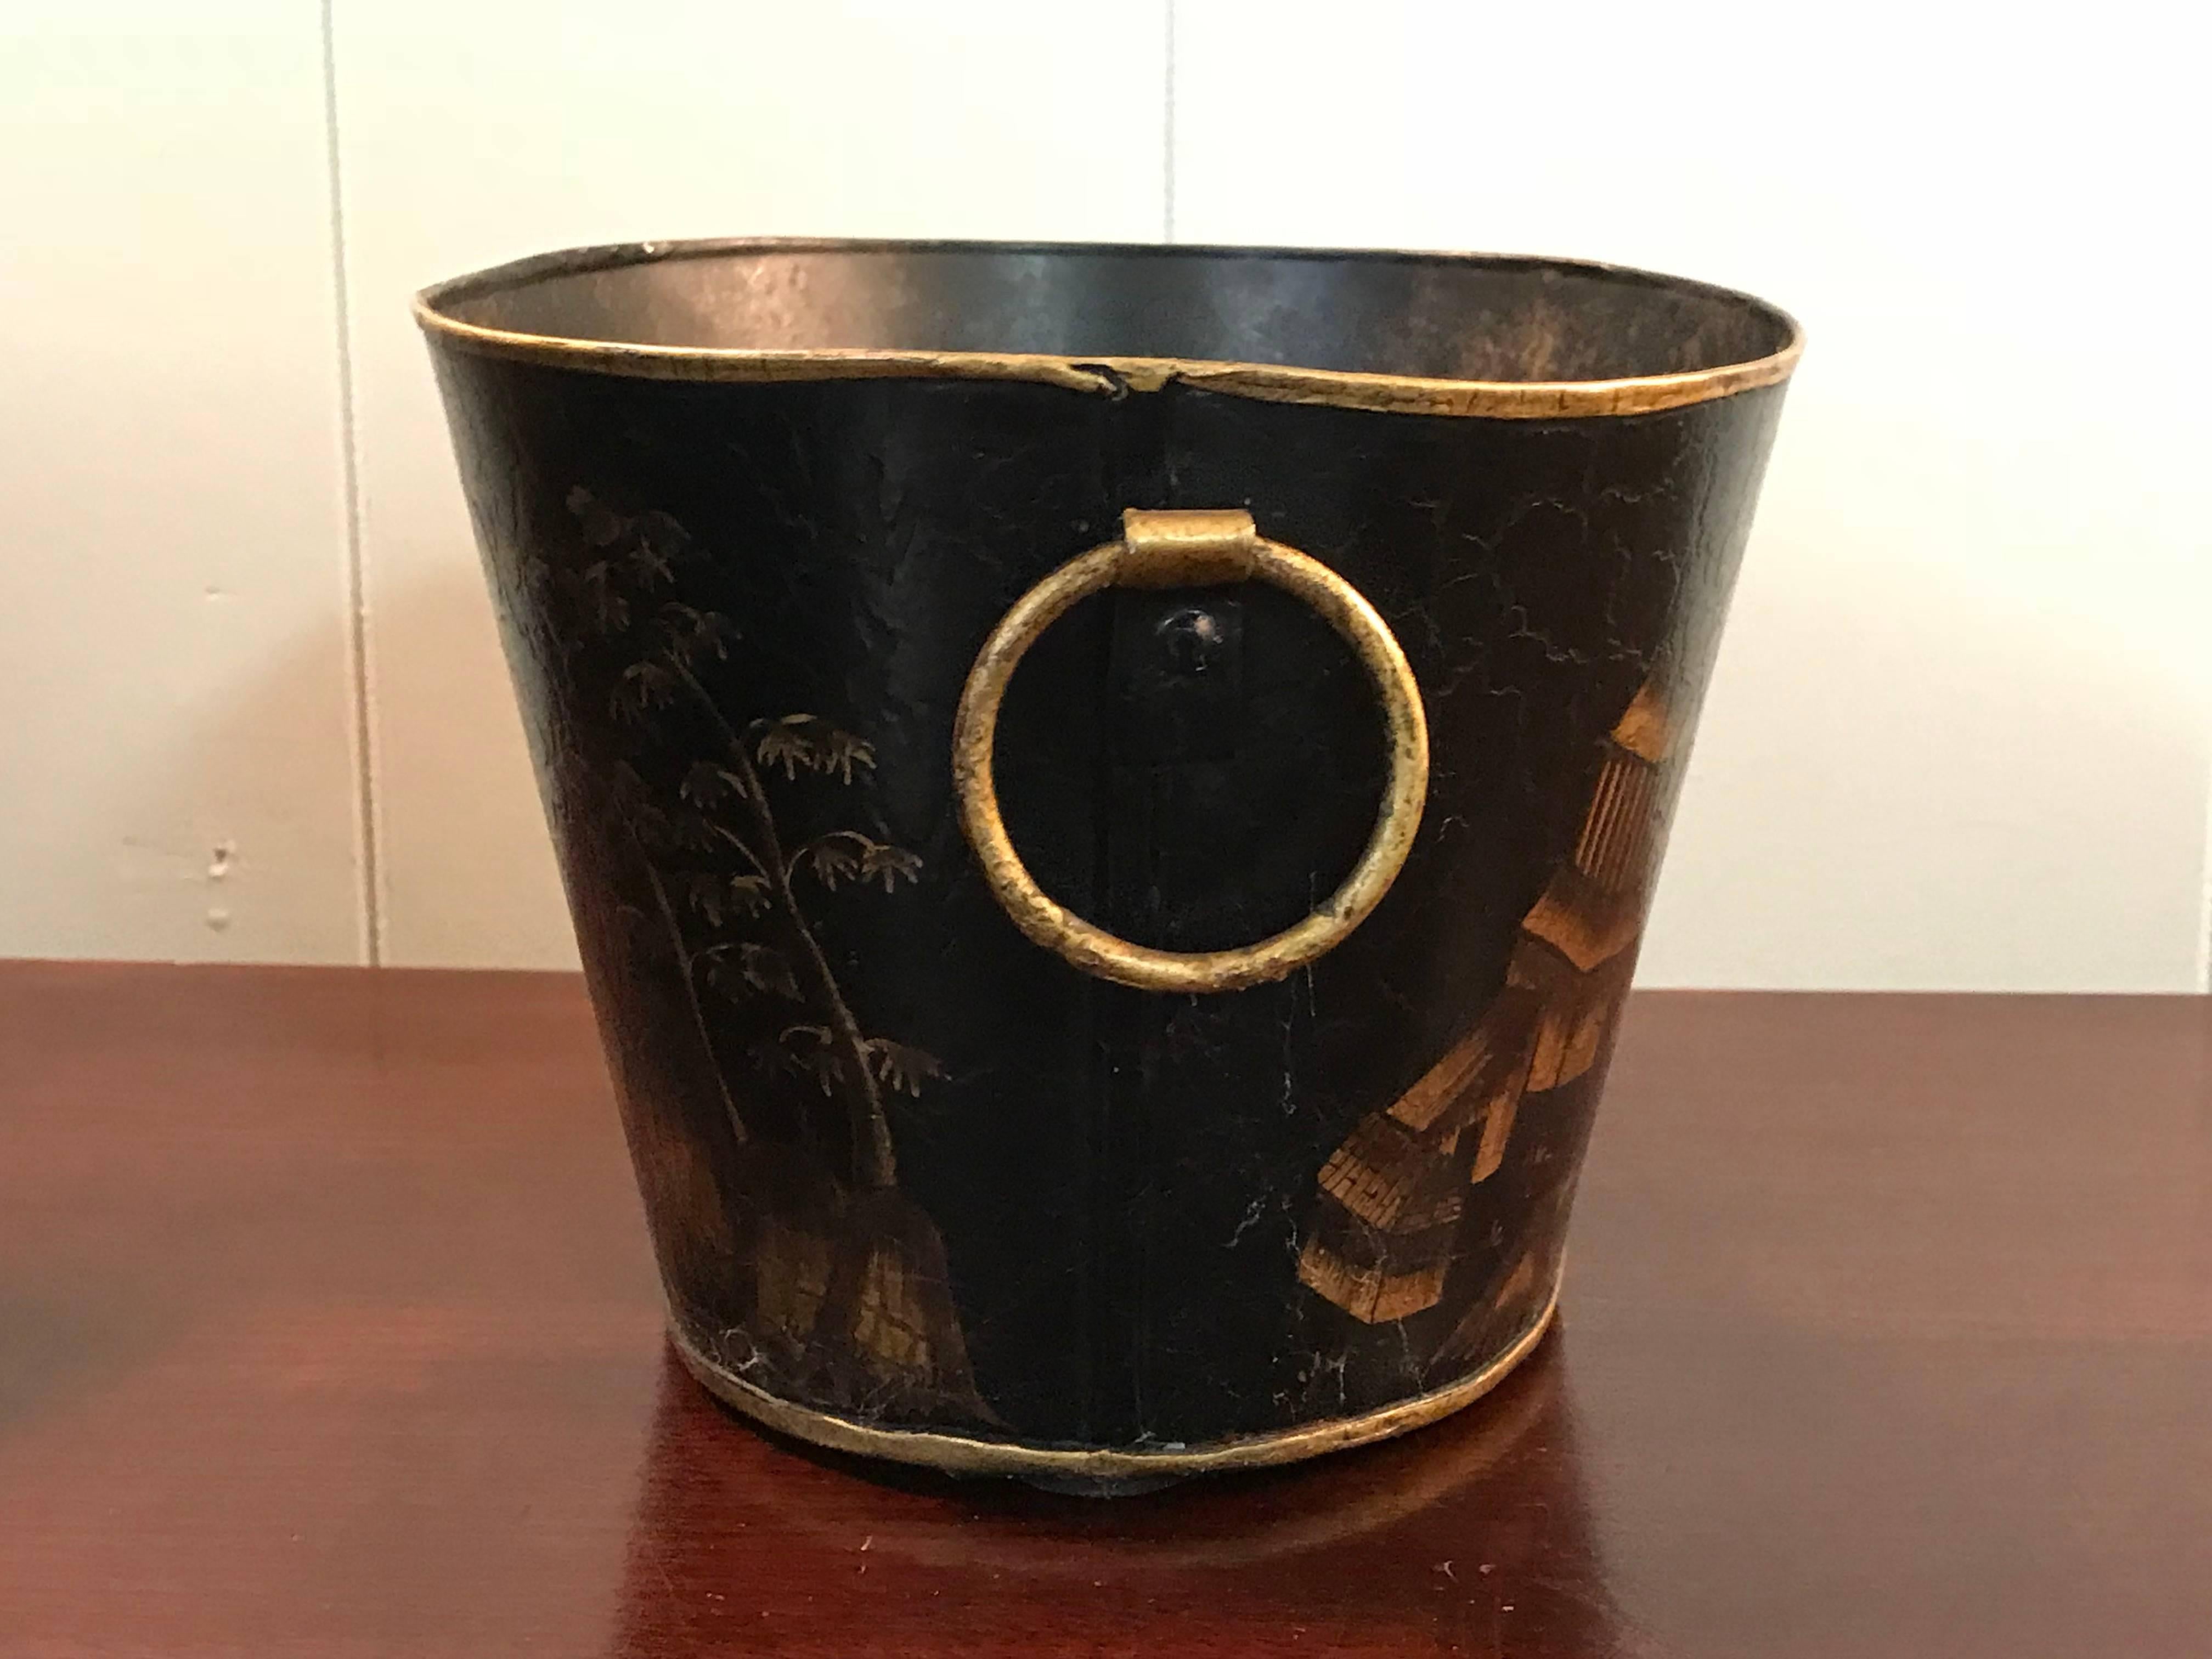 Offered is a fabulous, 1950s black and gold tole cachepot planter. The piece has a stunning, hand-painted chinoiserie motif, featuring mountainsides, pagodas, and ornate foliage. Has two circular, gilt handles - one on each side.